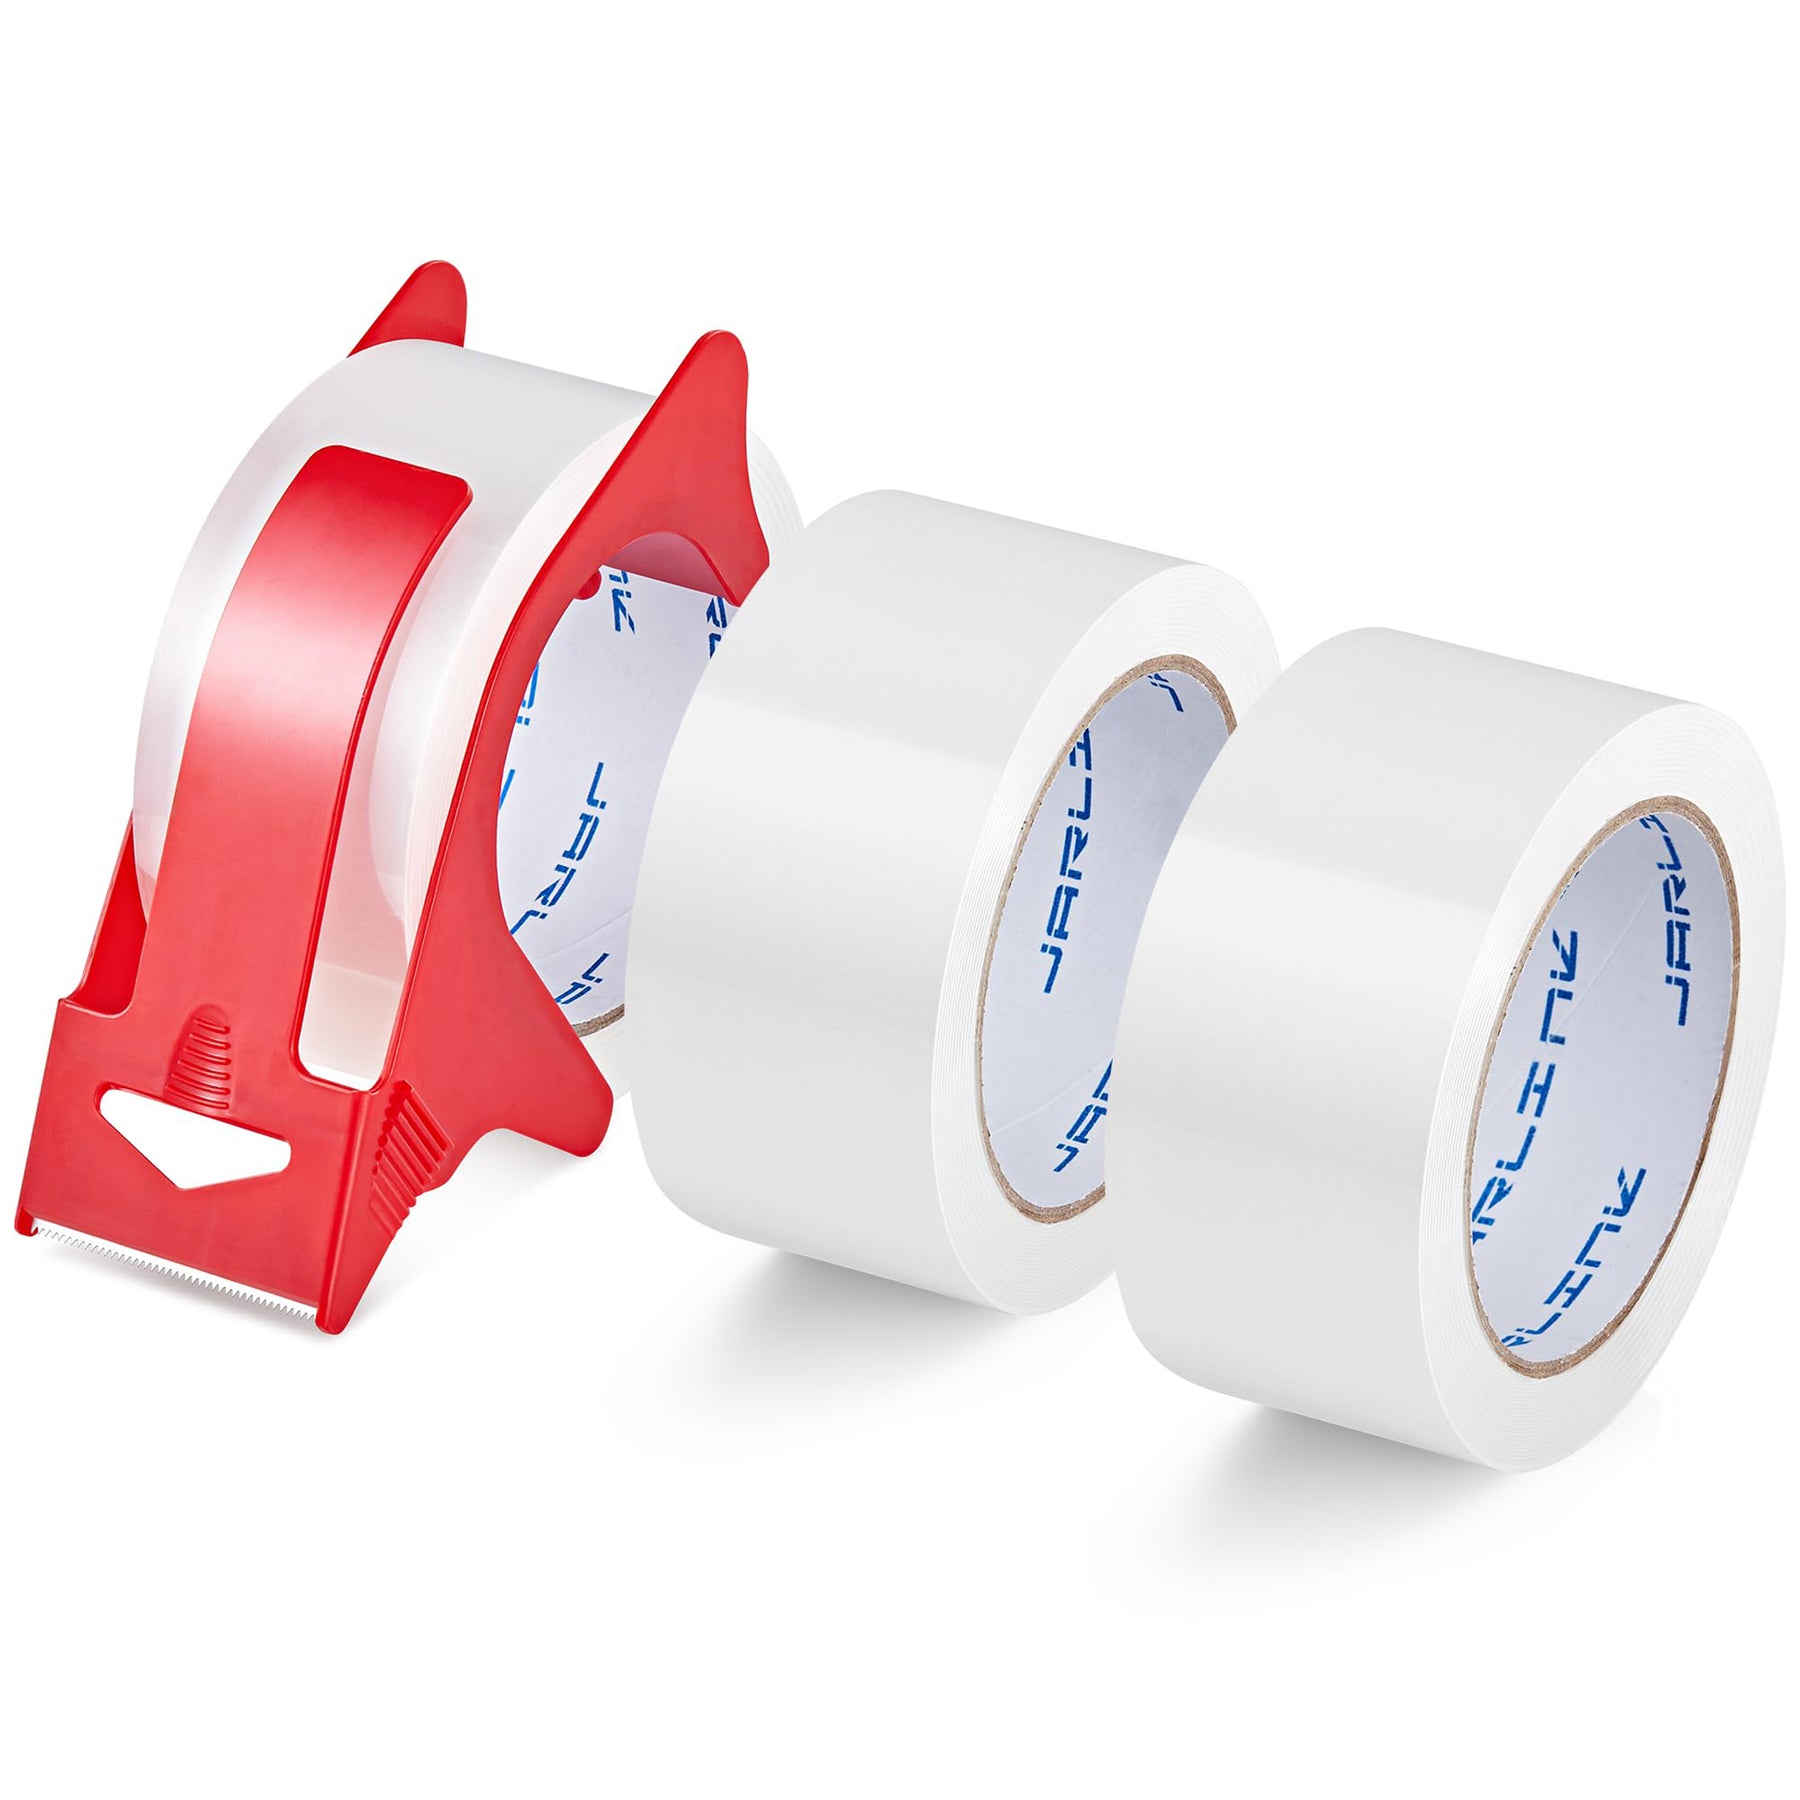 JARLINK 3 Rolls Clear Packing Tape with Dispenser, Heavy Duty Packaging Tape Refills for Shipping Packaging Mailing, 2.7mil Thick, 1.88 inches Wide, 55 Yards Per Roll, 165 Total Yards